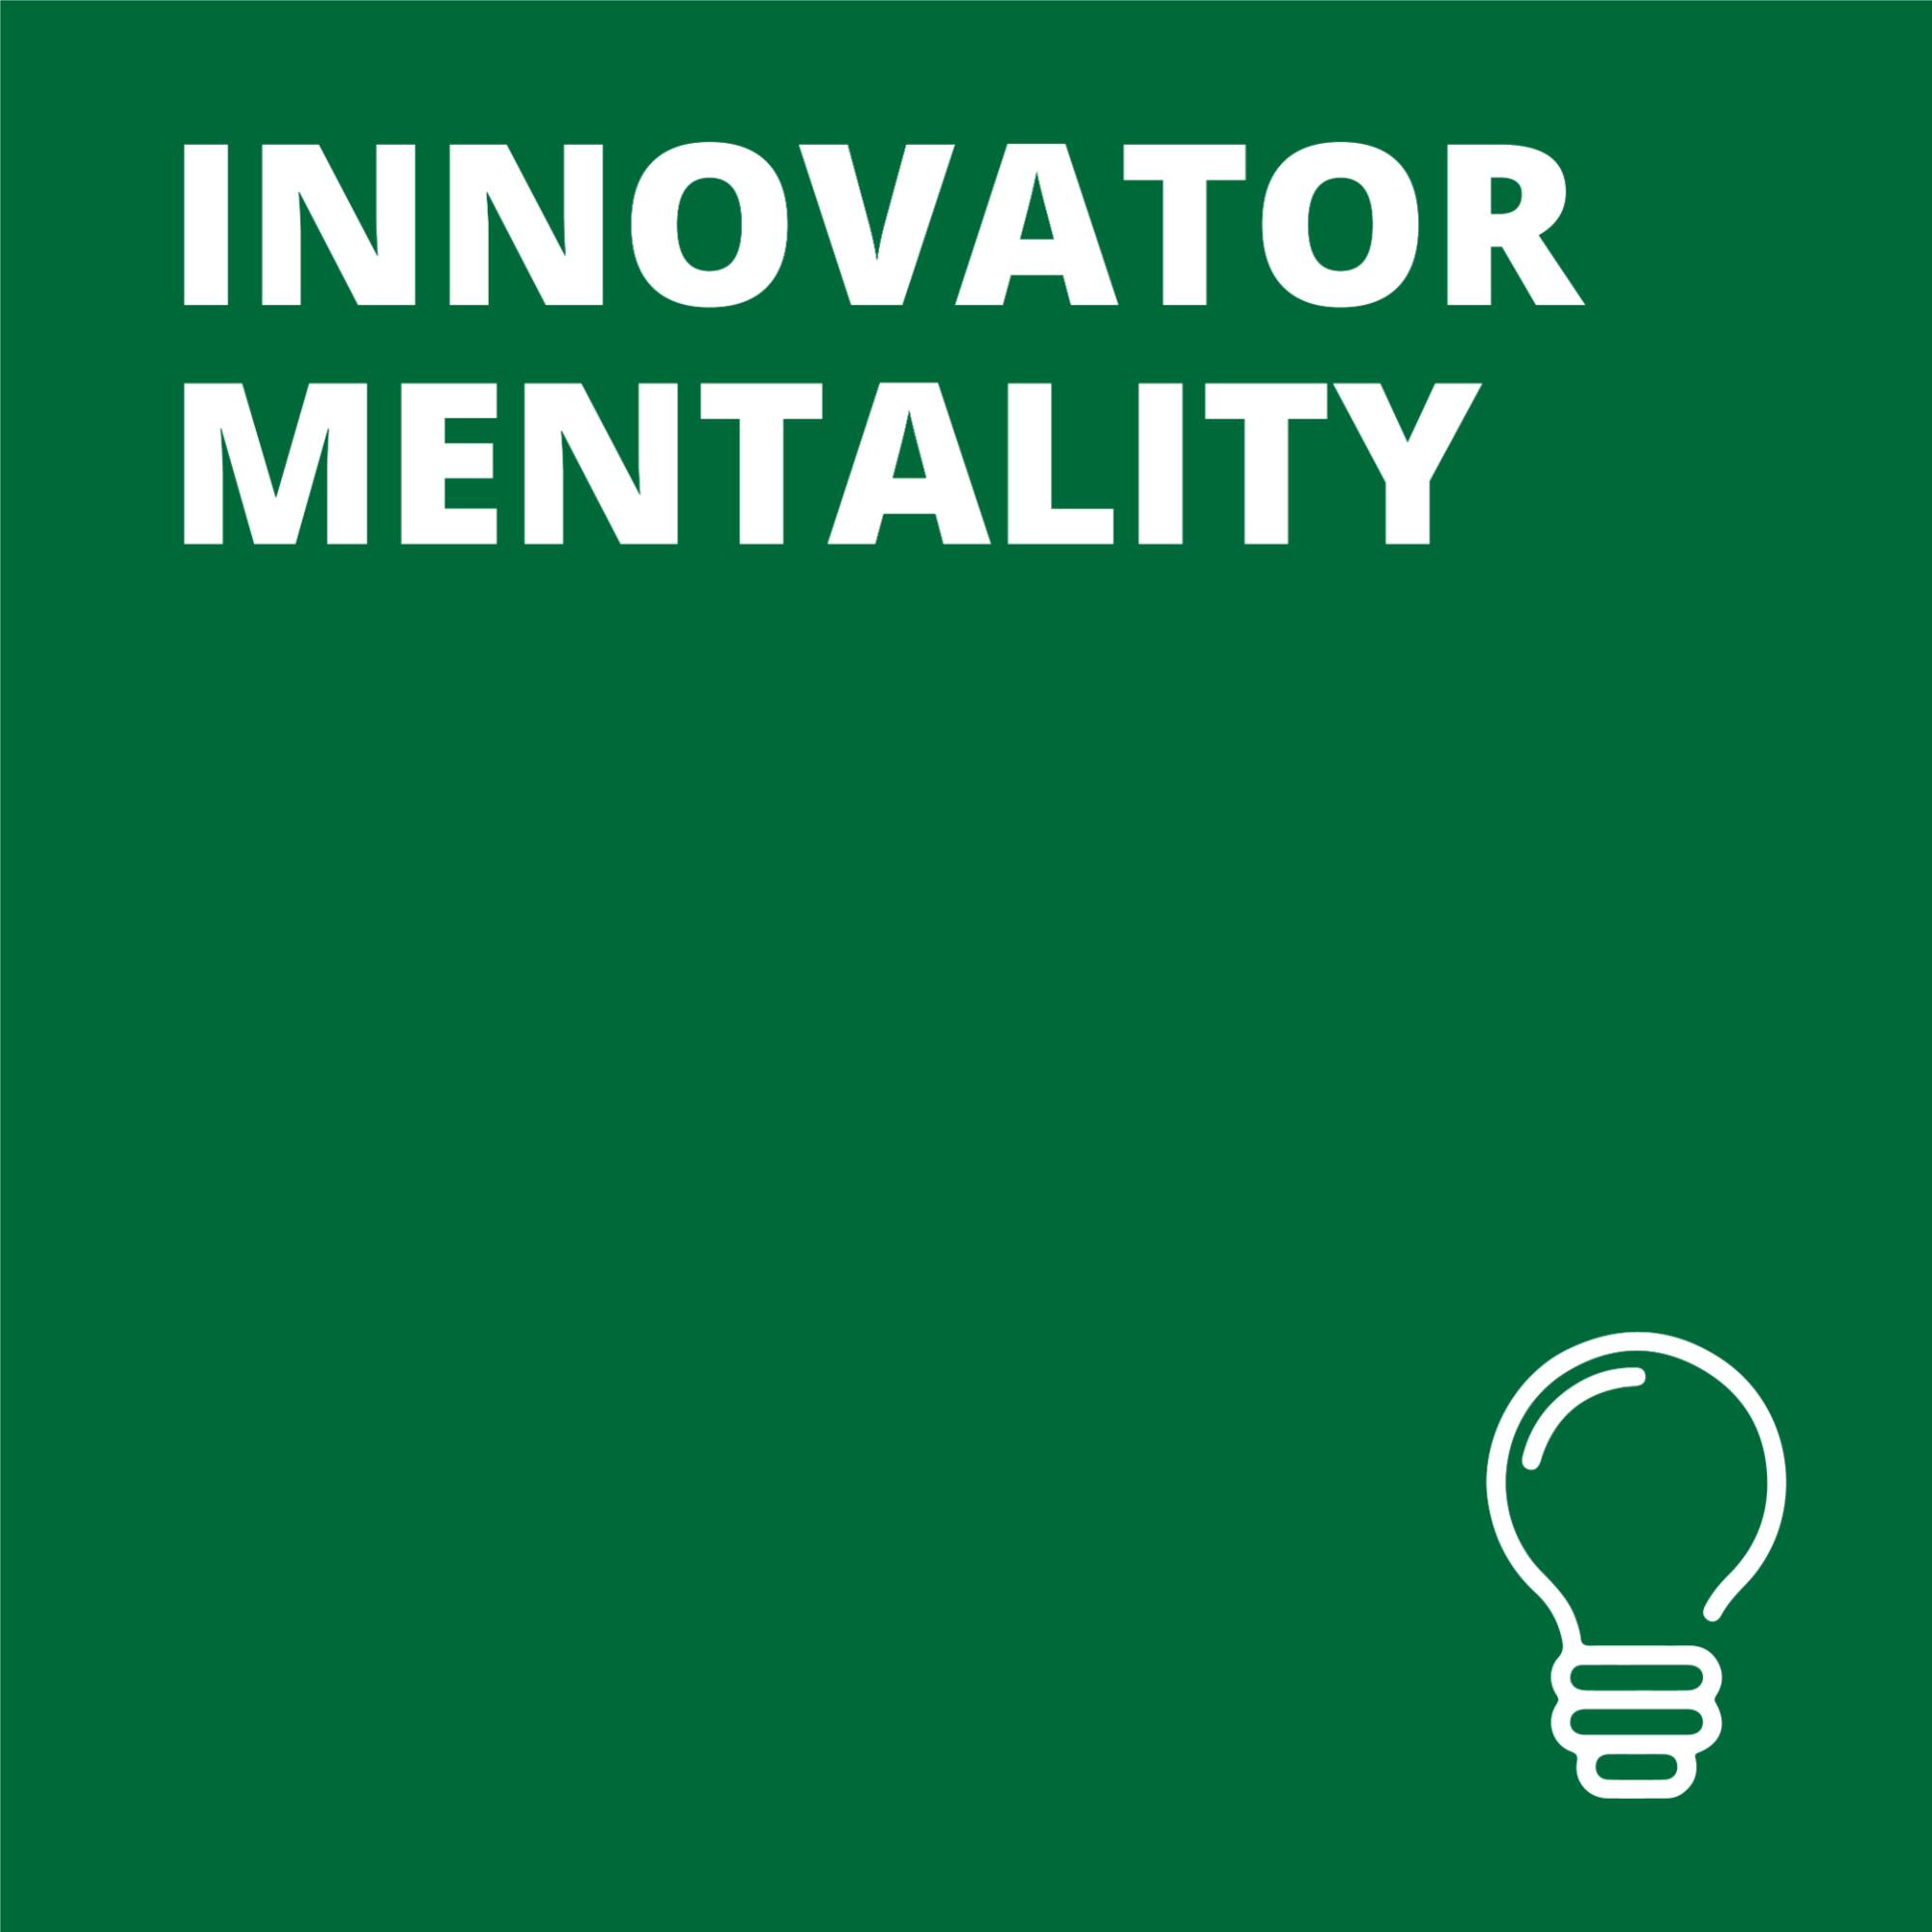 "Innovator Mentality" text with lightbulb icon